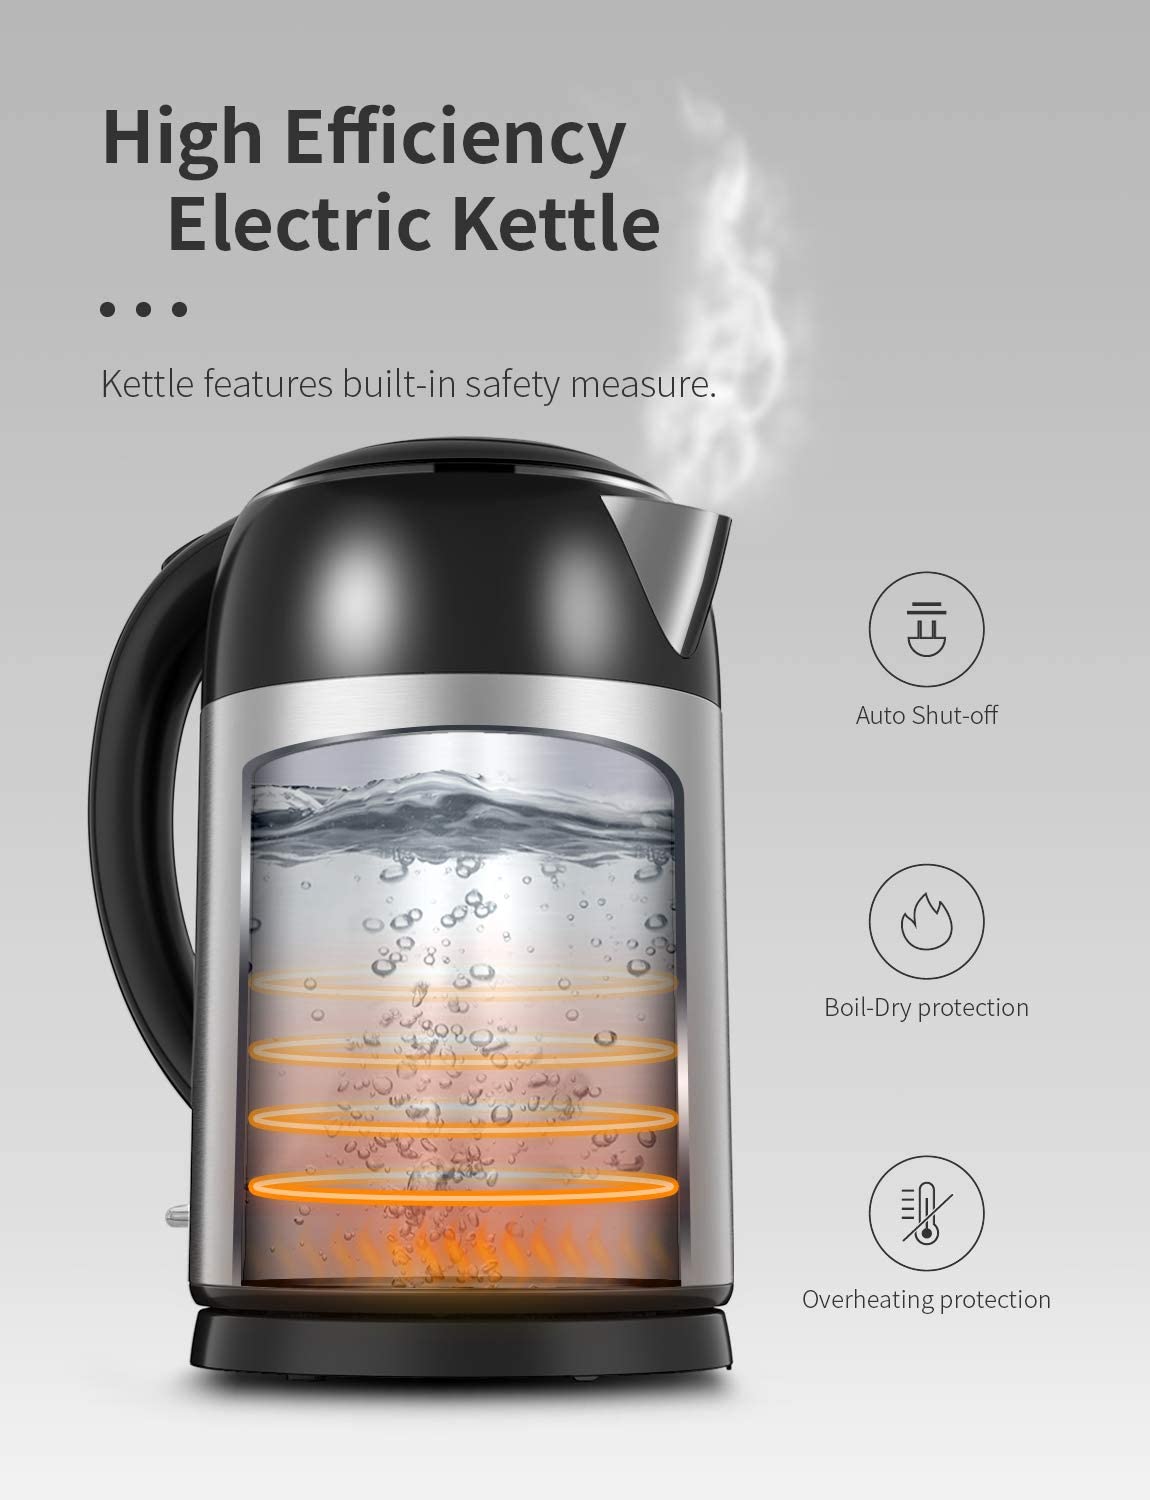 https://xulnaz.com/wp-content/uploads/2020/03/SHARDOR-Electric-Kettle-Stainless-Steel-Electric-Tea-Kettle-1.7L-1500W-Fast-Boiling-Cordless-with-Cool-Touch-Auto-Shutoff-and-Overheat-Protection-for-Tea...6.jpg